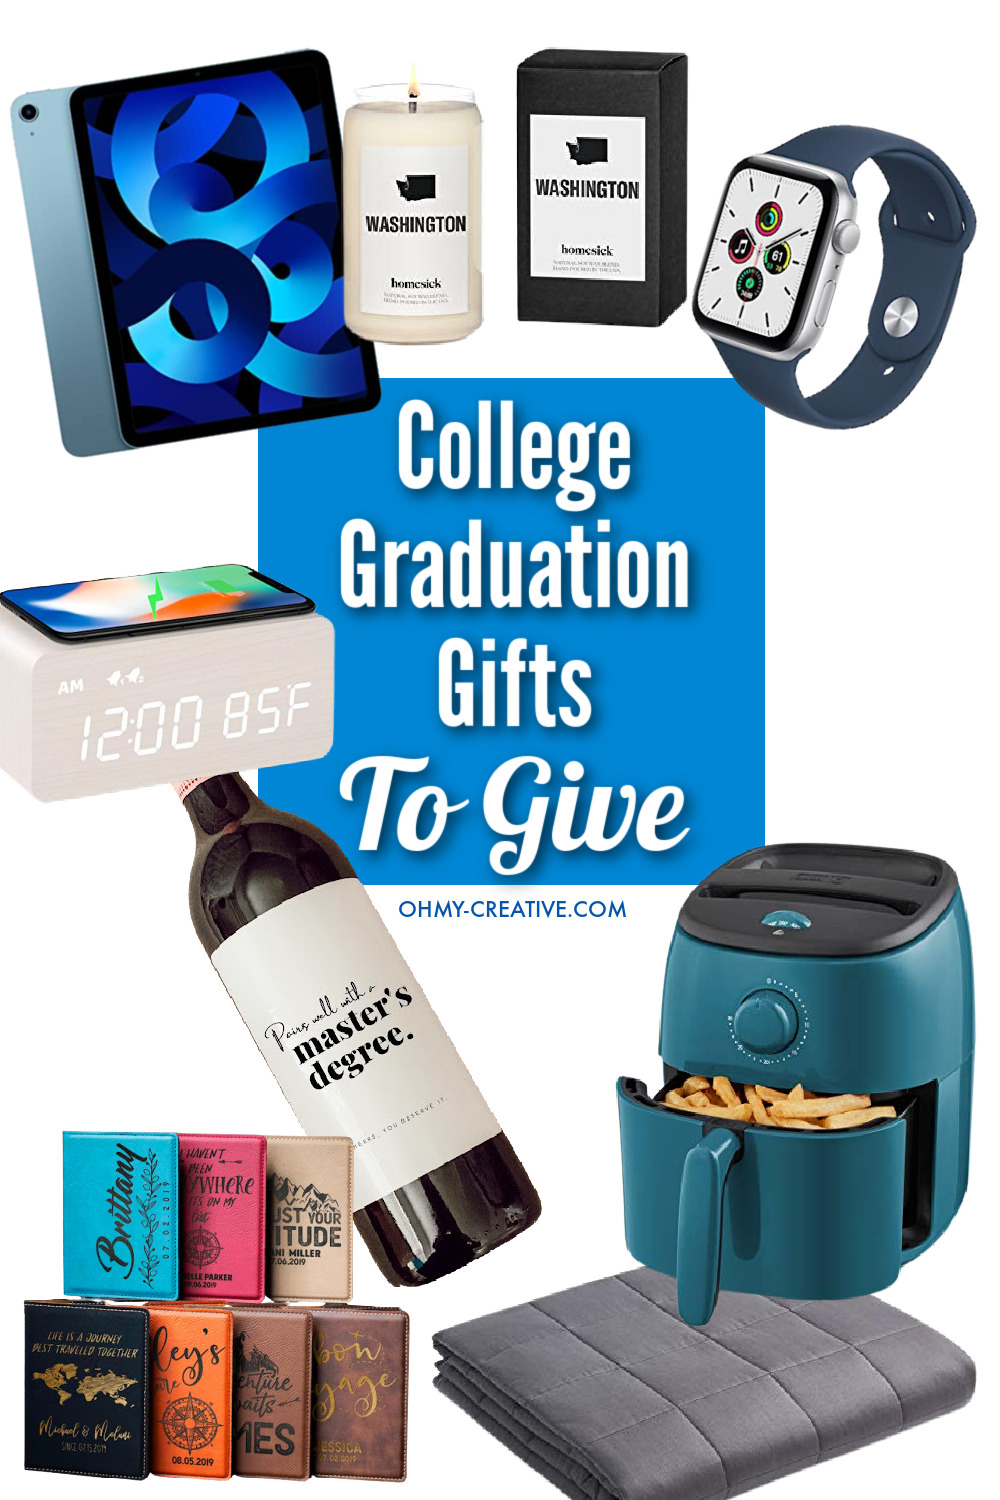 A collage of great college graduation gift ideas to give!